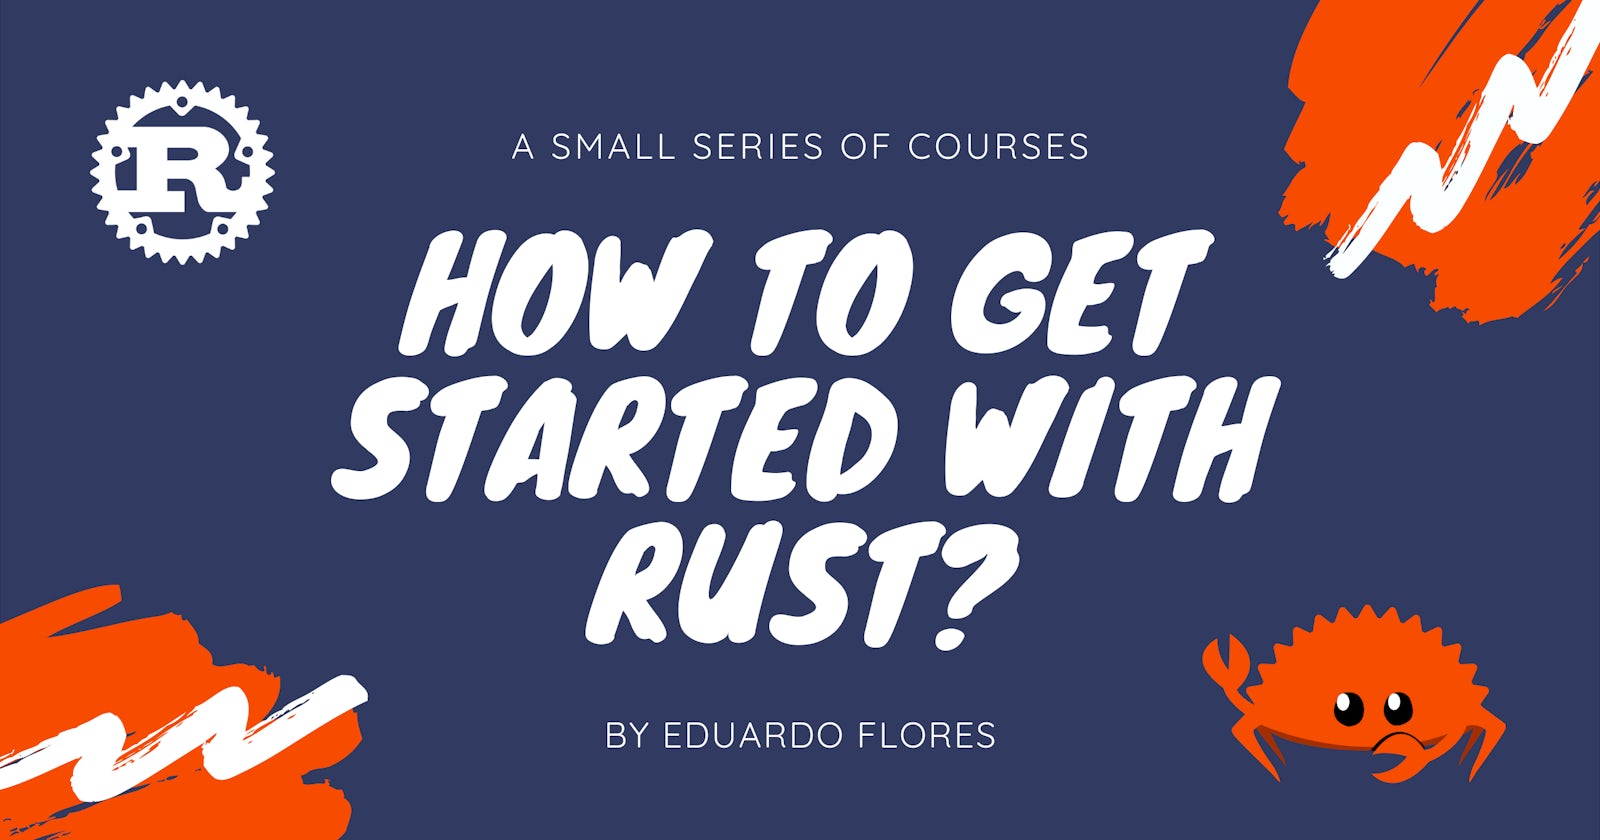 How to get started with Rust?